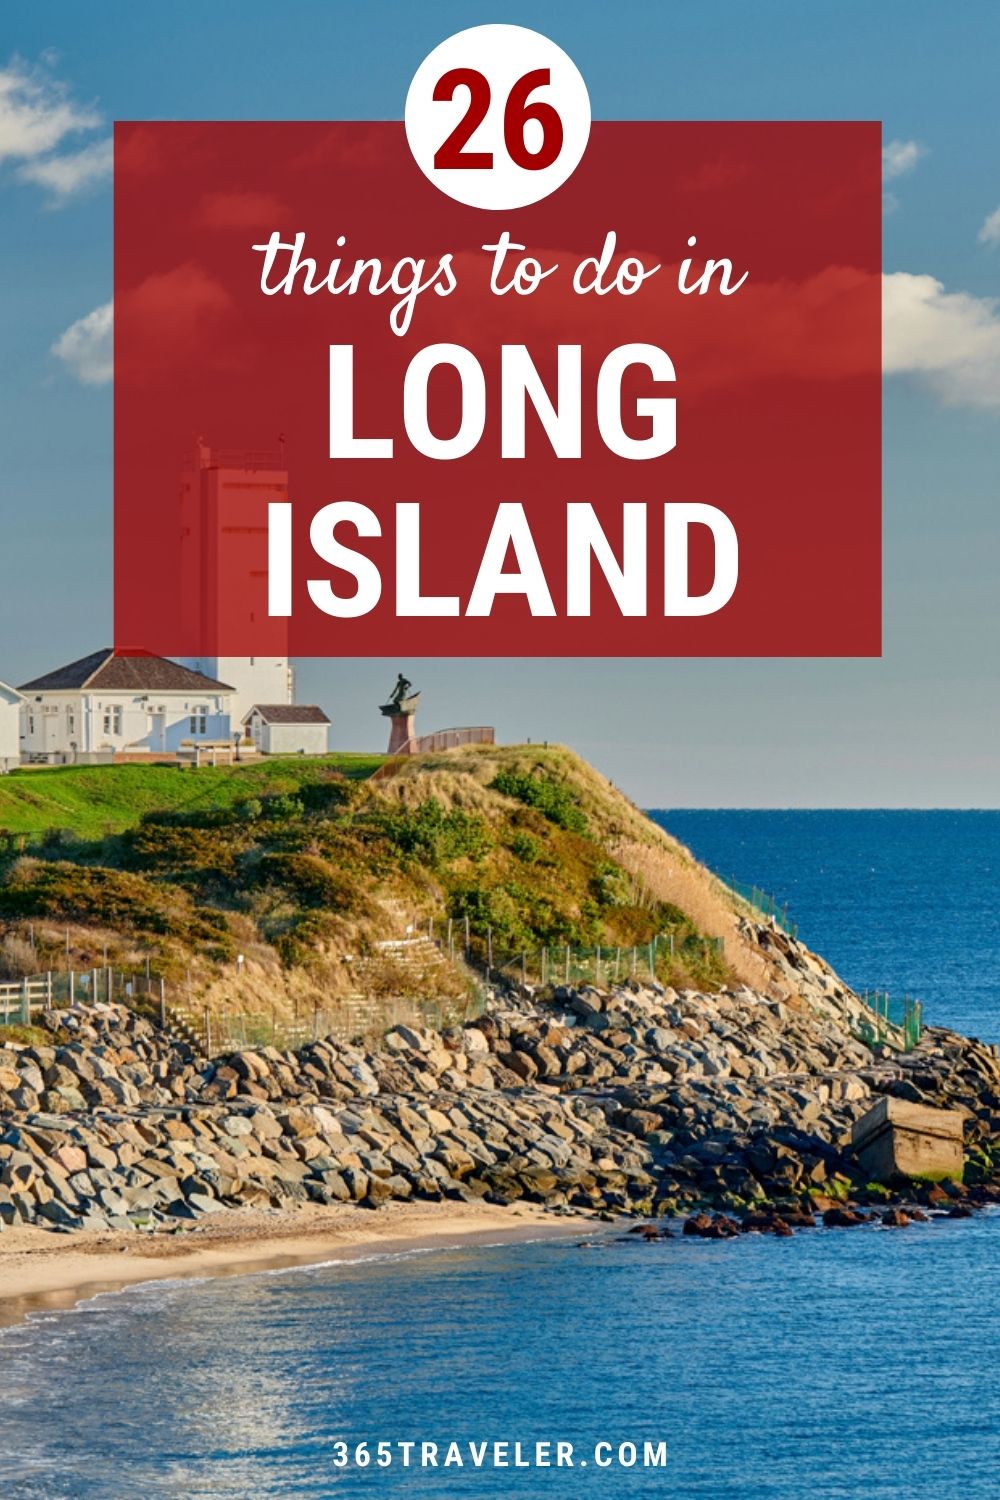 26 Things To Do in Long Island You Can’t Miss